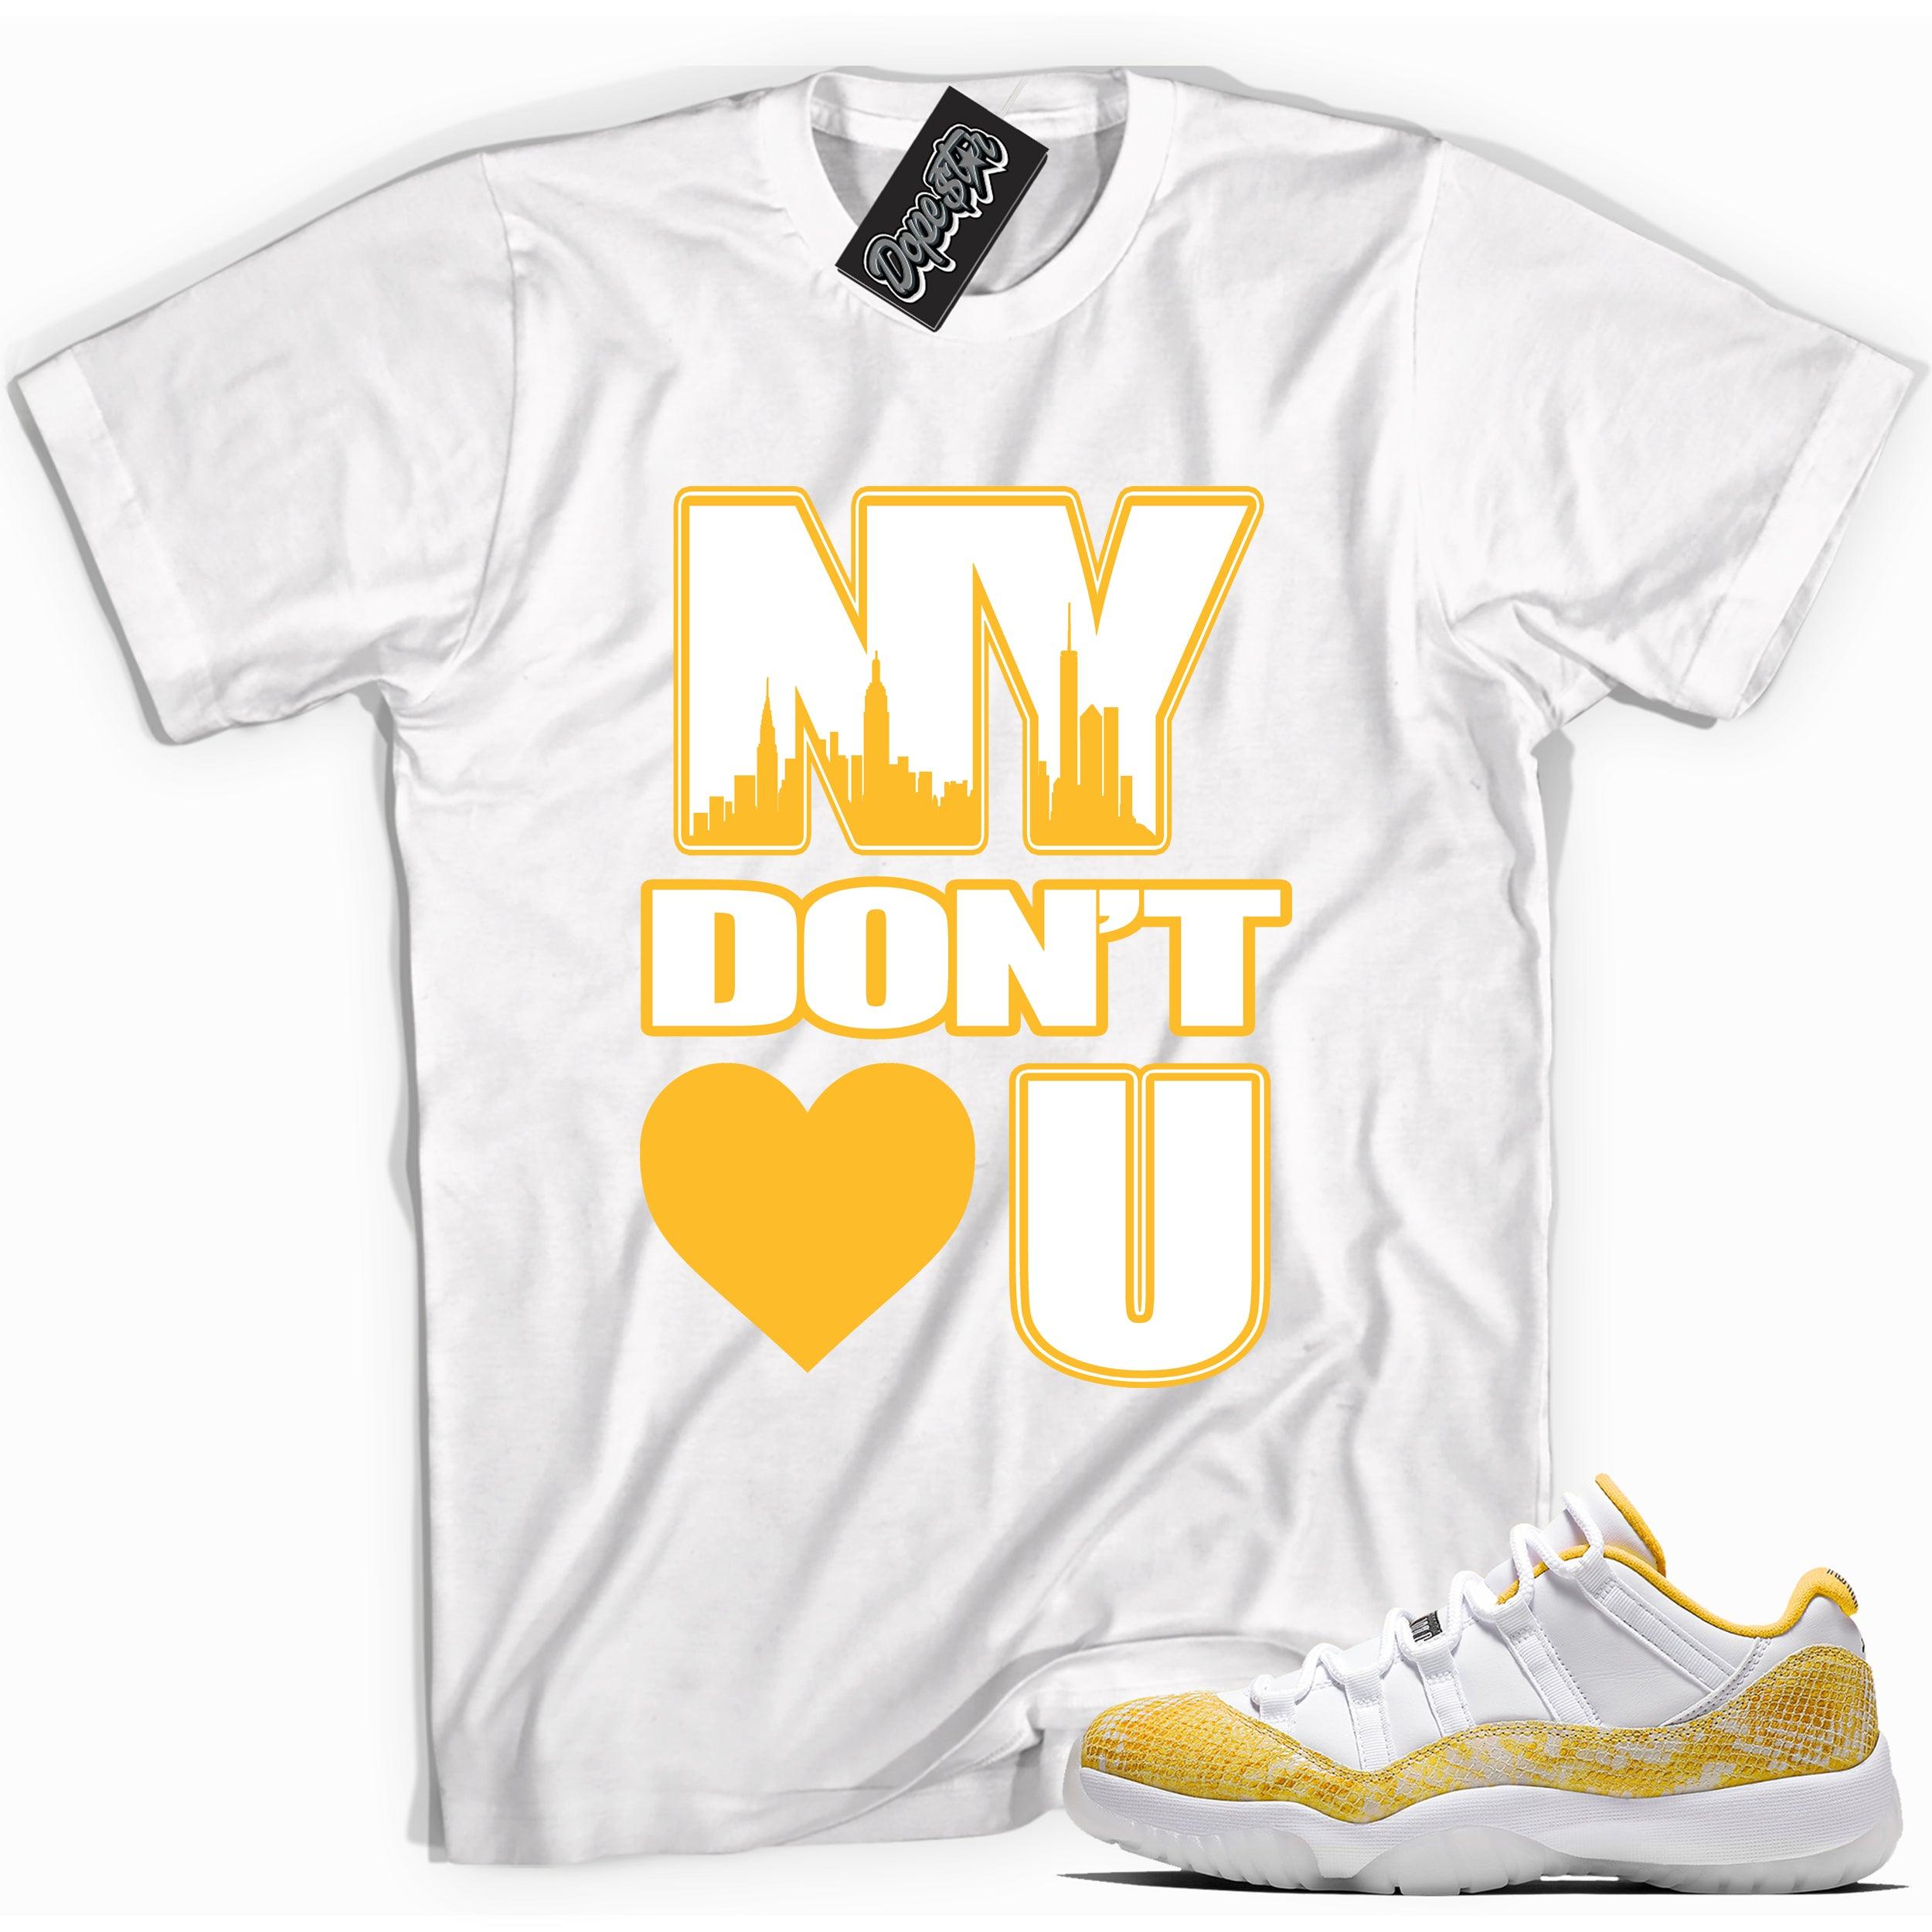 Cool white graphic tee with 'NY Don't <3 U' print, that perfectly matches Air Jordan 11 Low Yellow Snakeskin sneakers